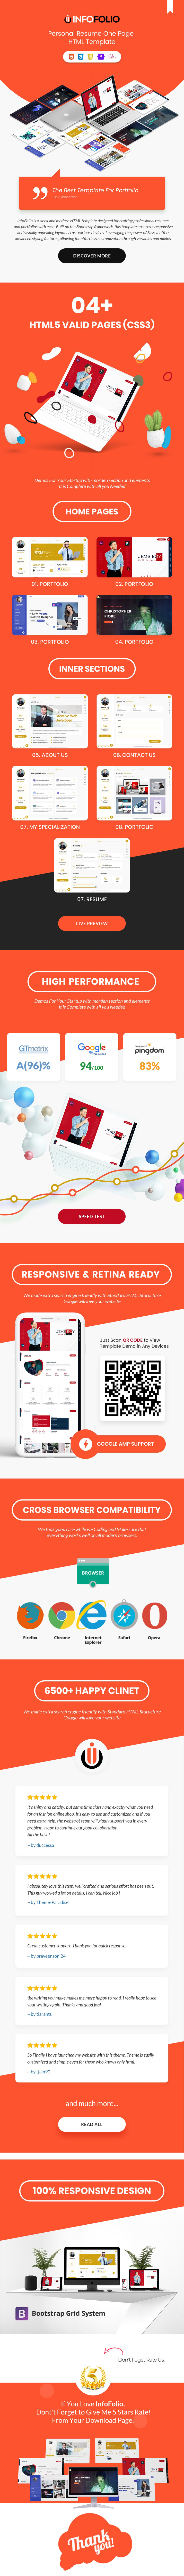 InfoFolio - Resume One Page HTML Template - 1